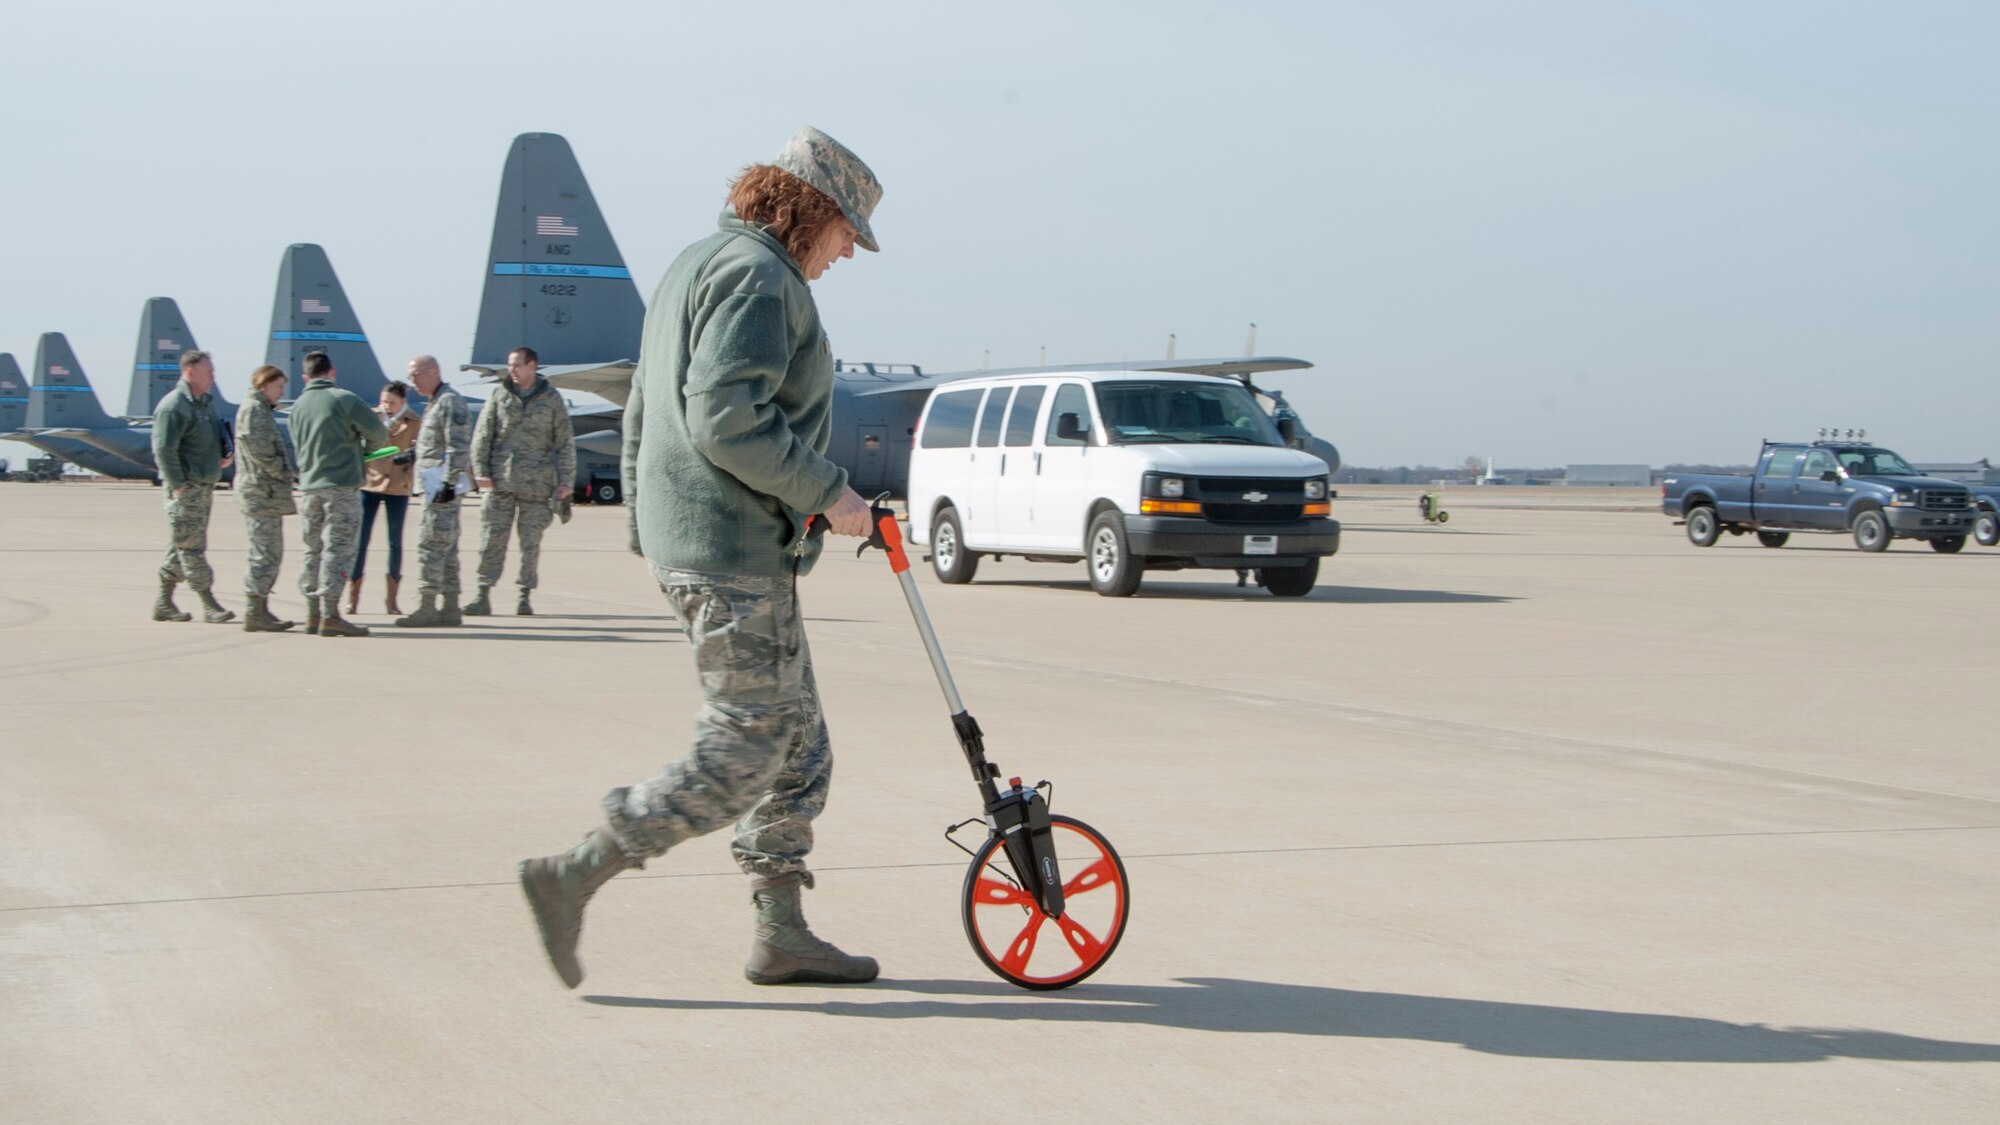 Master Sgt. Joy Meek, a deployed broadcaster to Air Force Mortuary Affairs Operations, measures distances for setup during a dignified transfer divert exercise March 19, 2015, at New Castle Air National Guard Base, Del. The ANG base is AFMAO’s alternate location for dignified transfers should one need to be conducted due to inclement weather during runway construction at Dover Air Force Base, Del. (U.S. Air Force photo/Senior Airman Jared Duhon)